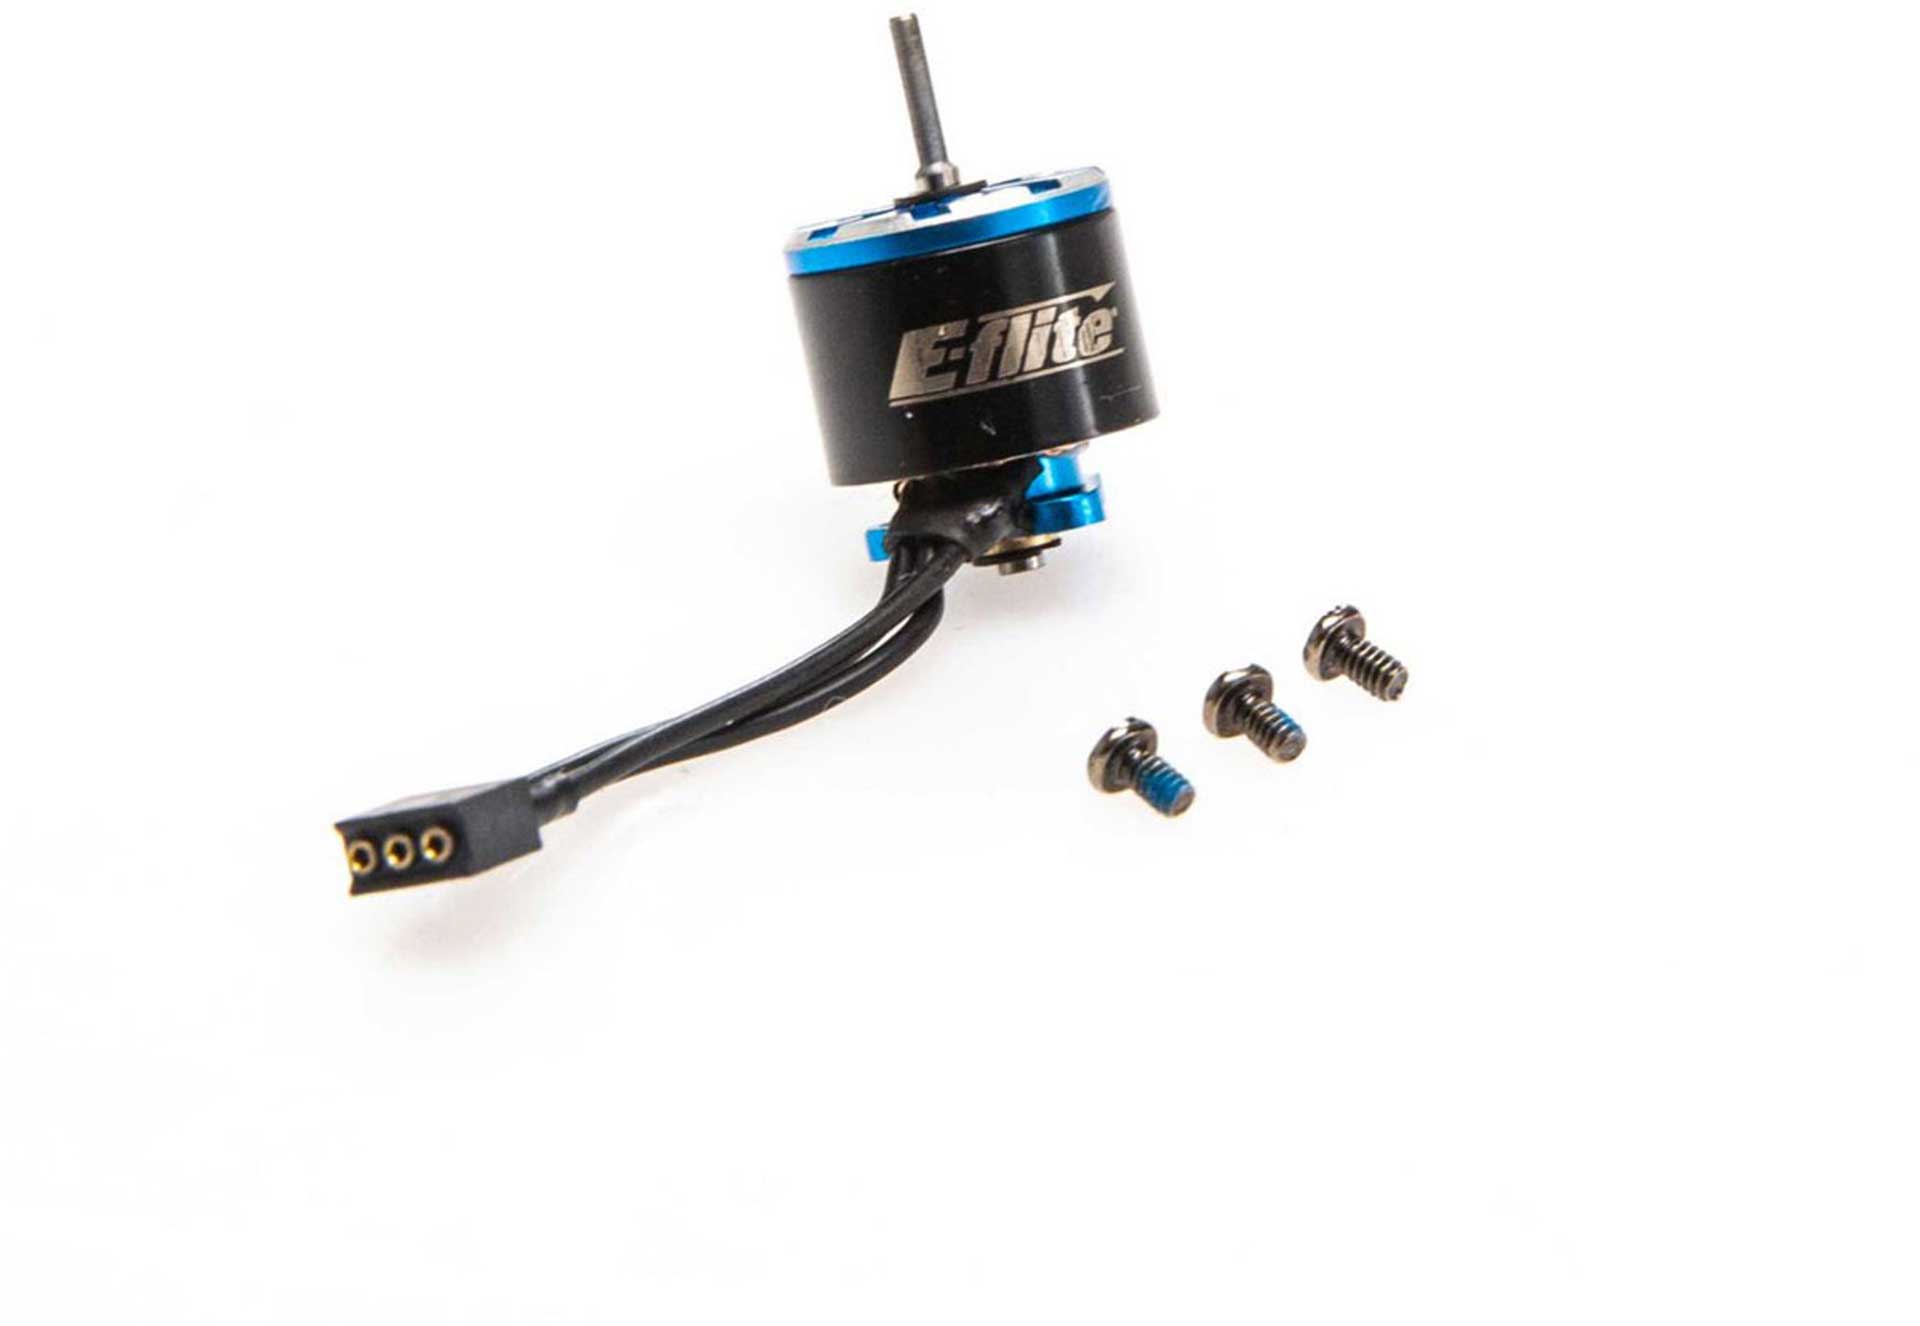 BLADE Brushless Tail Motor: mCPX BL2